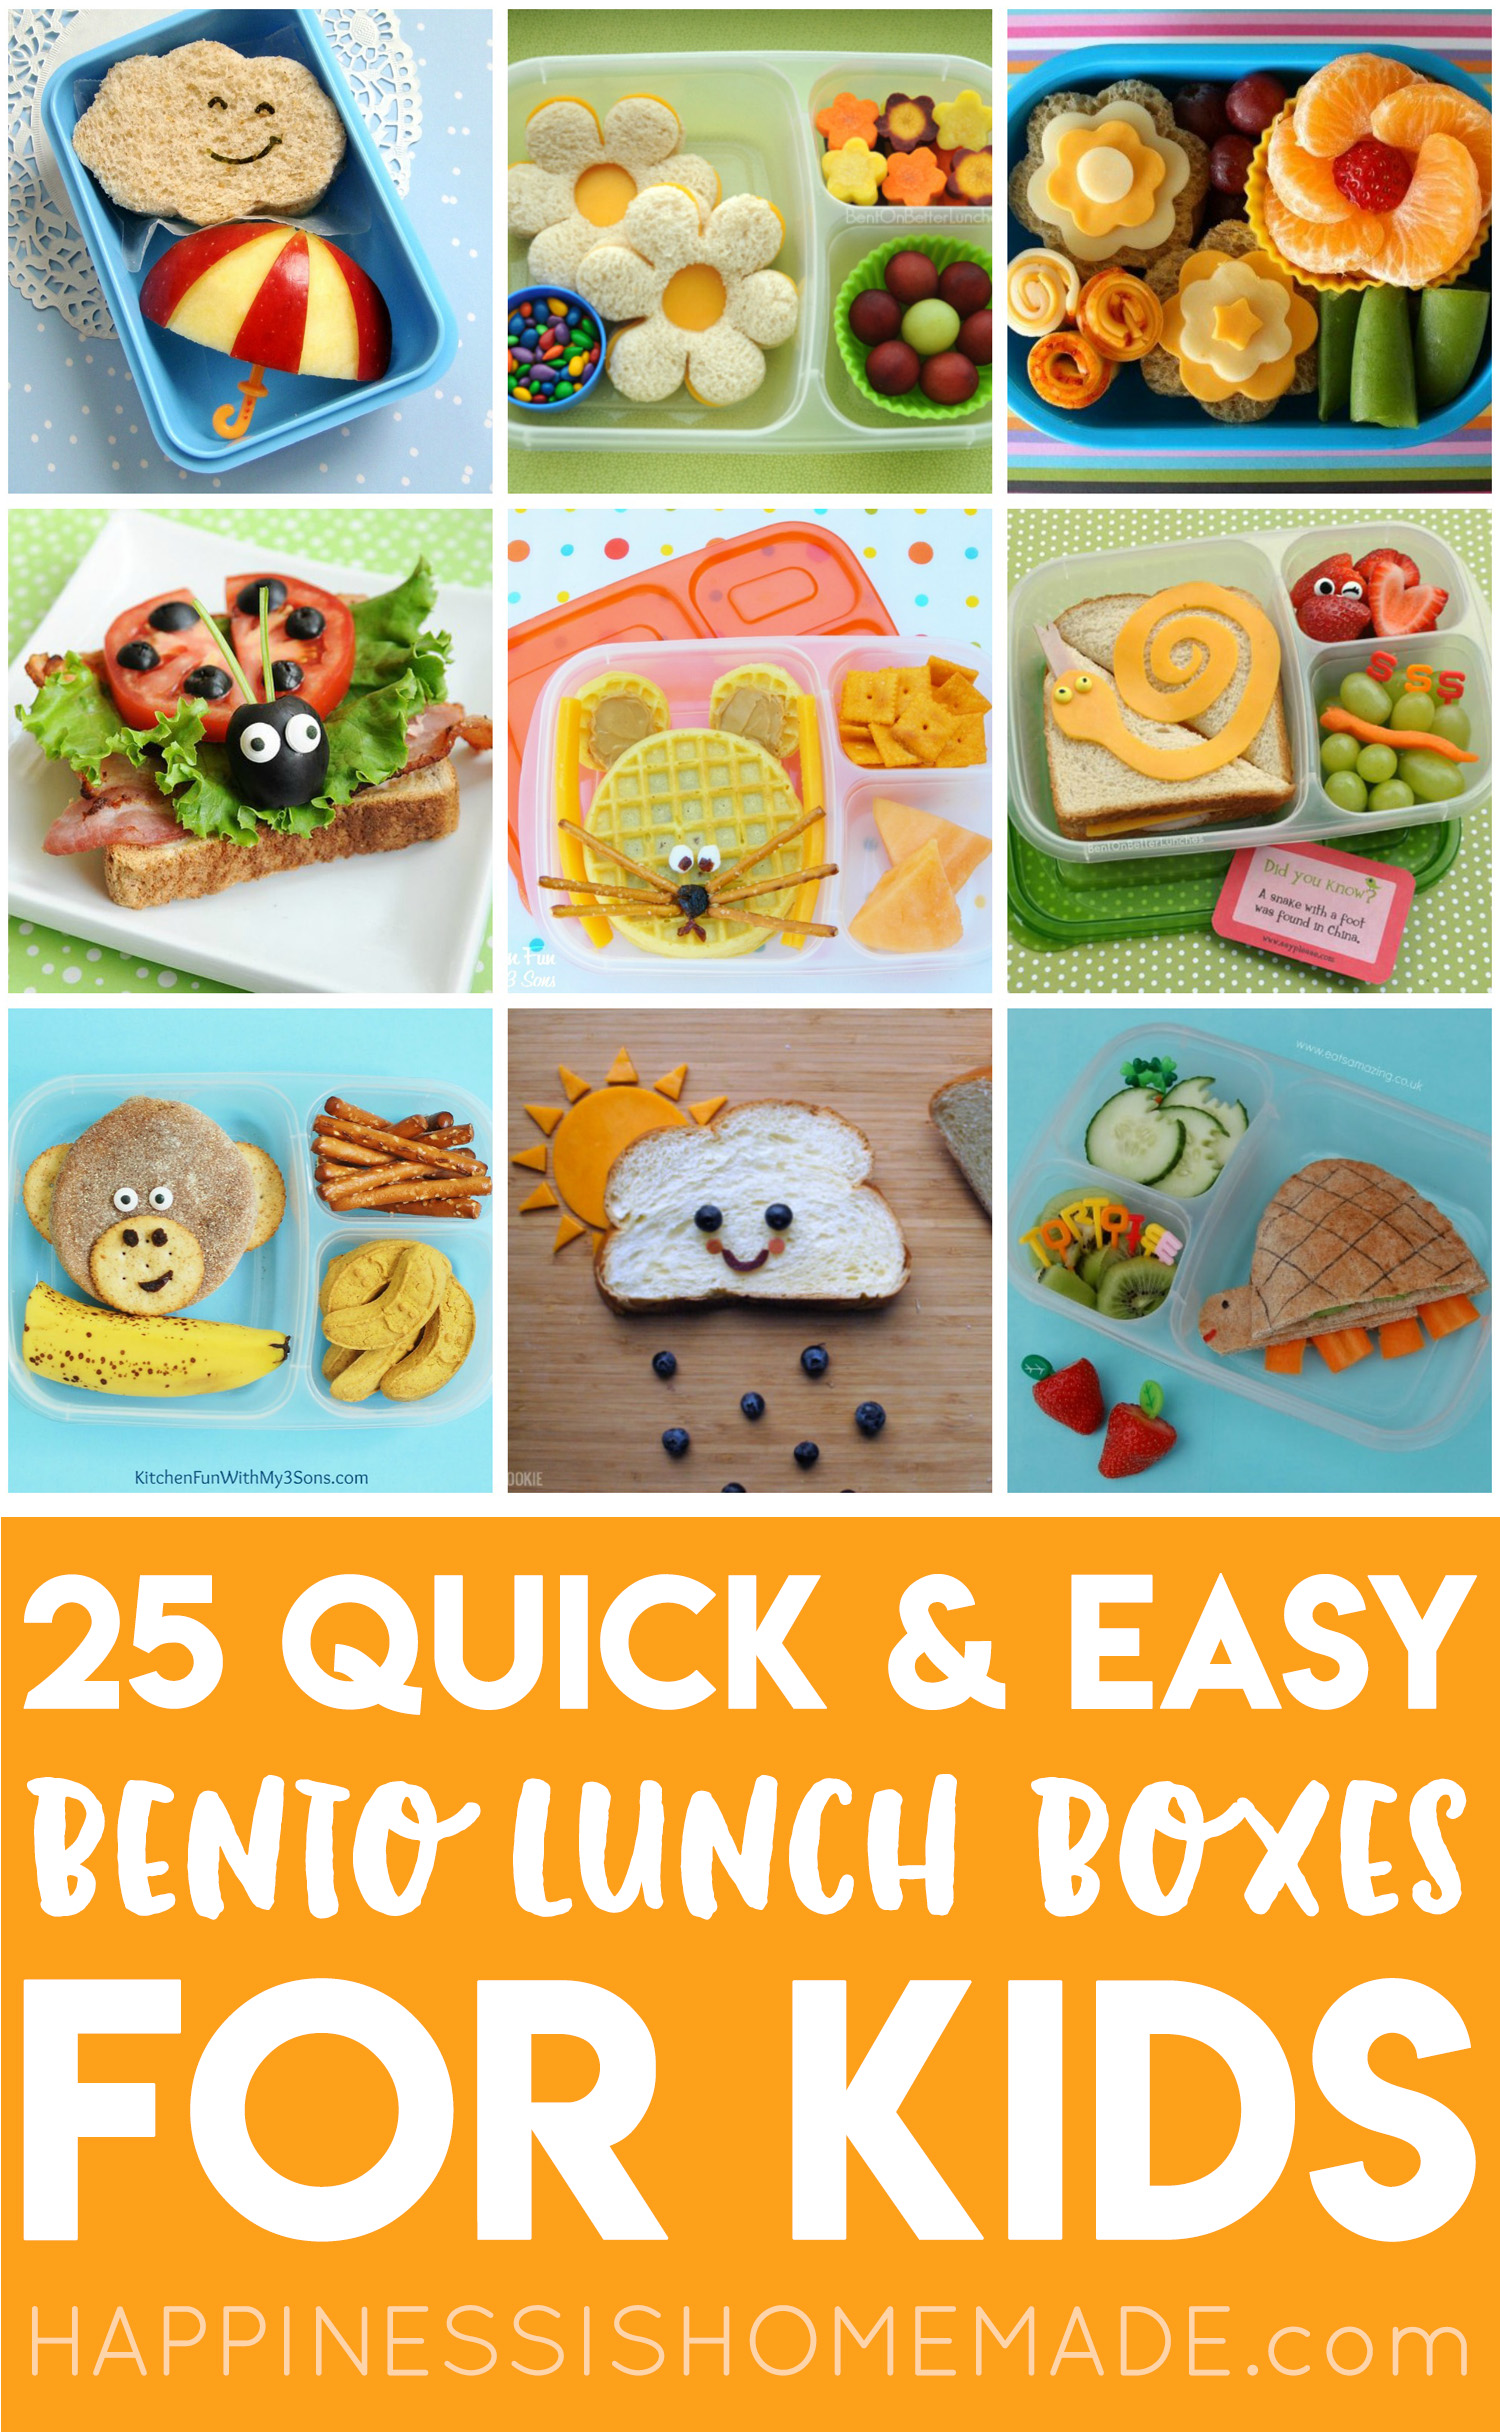 22+ Lunch Ideas For Kids Gif